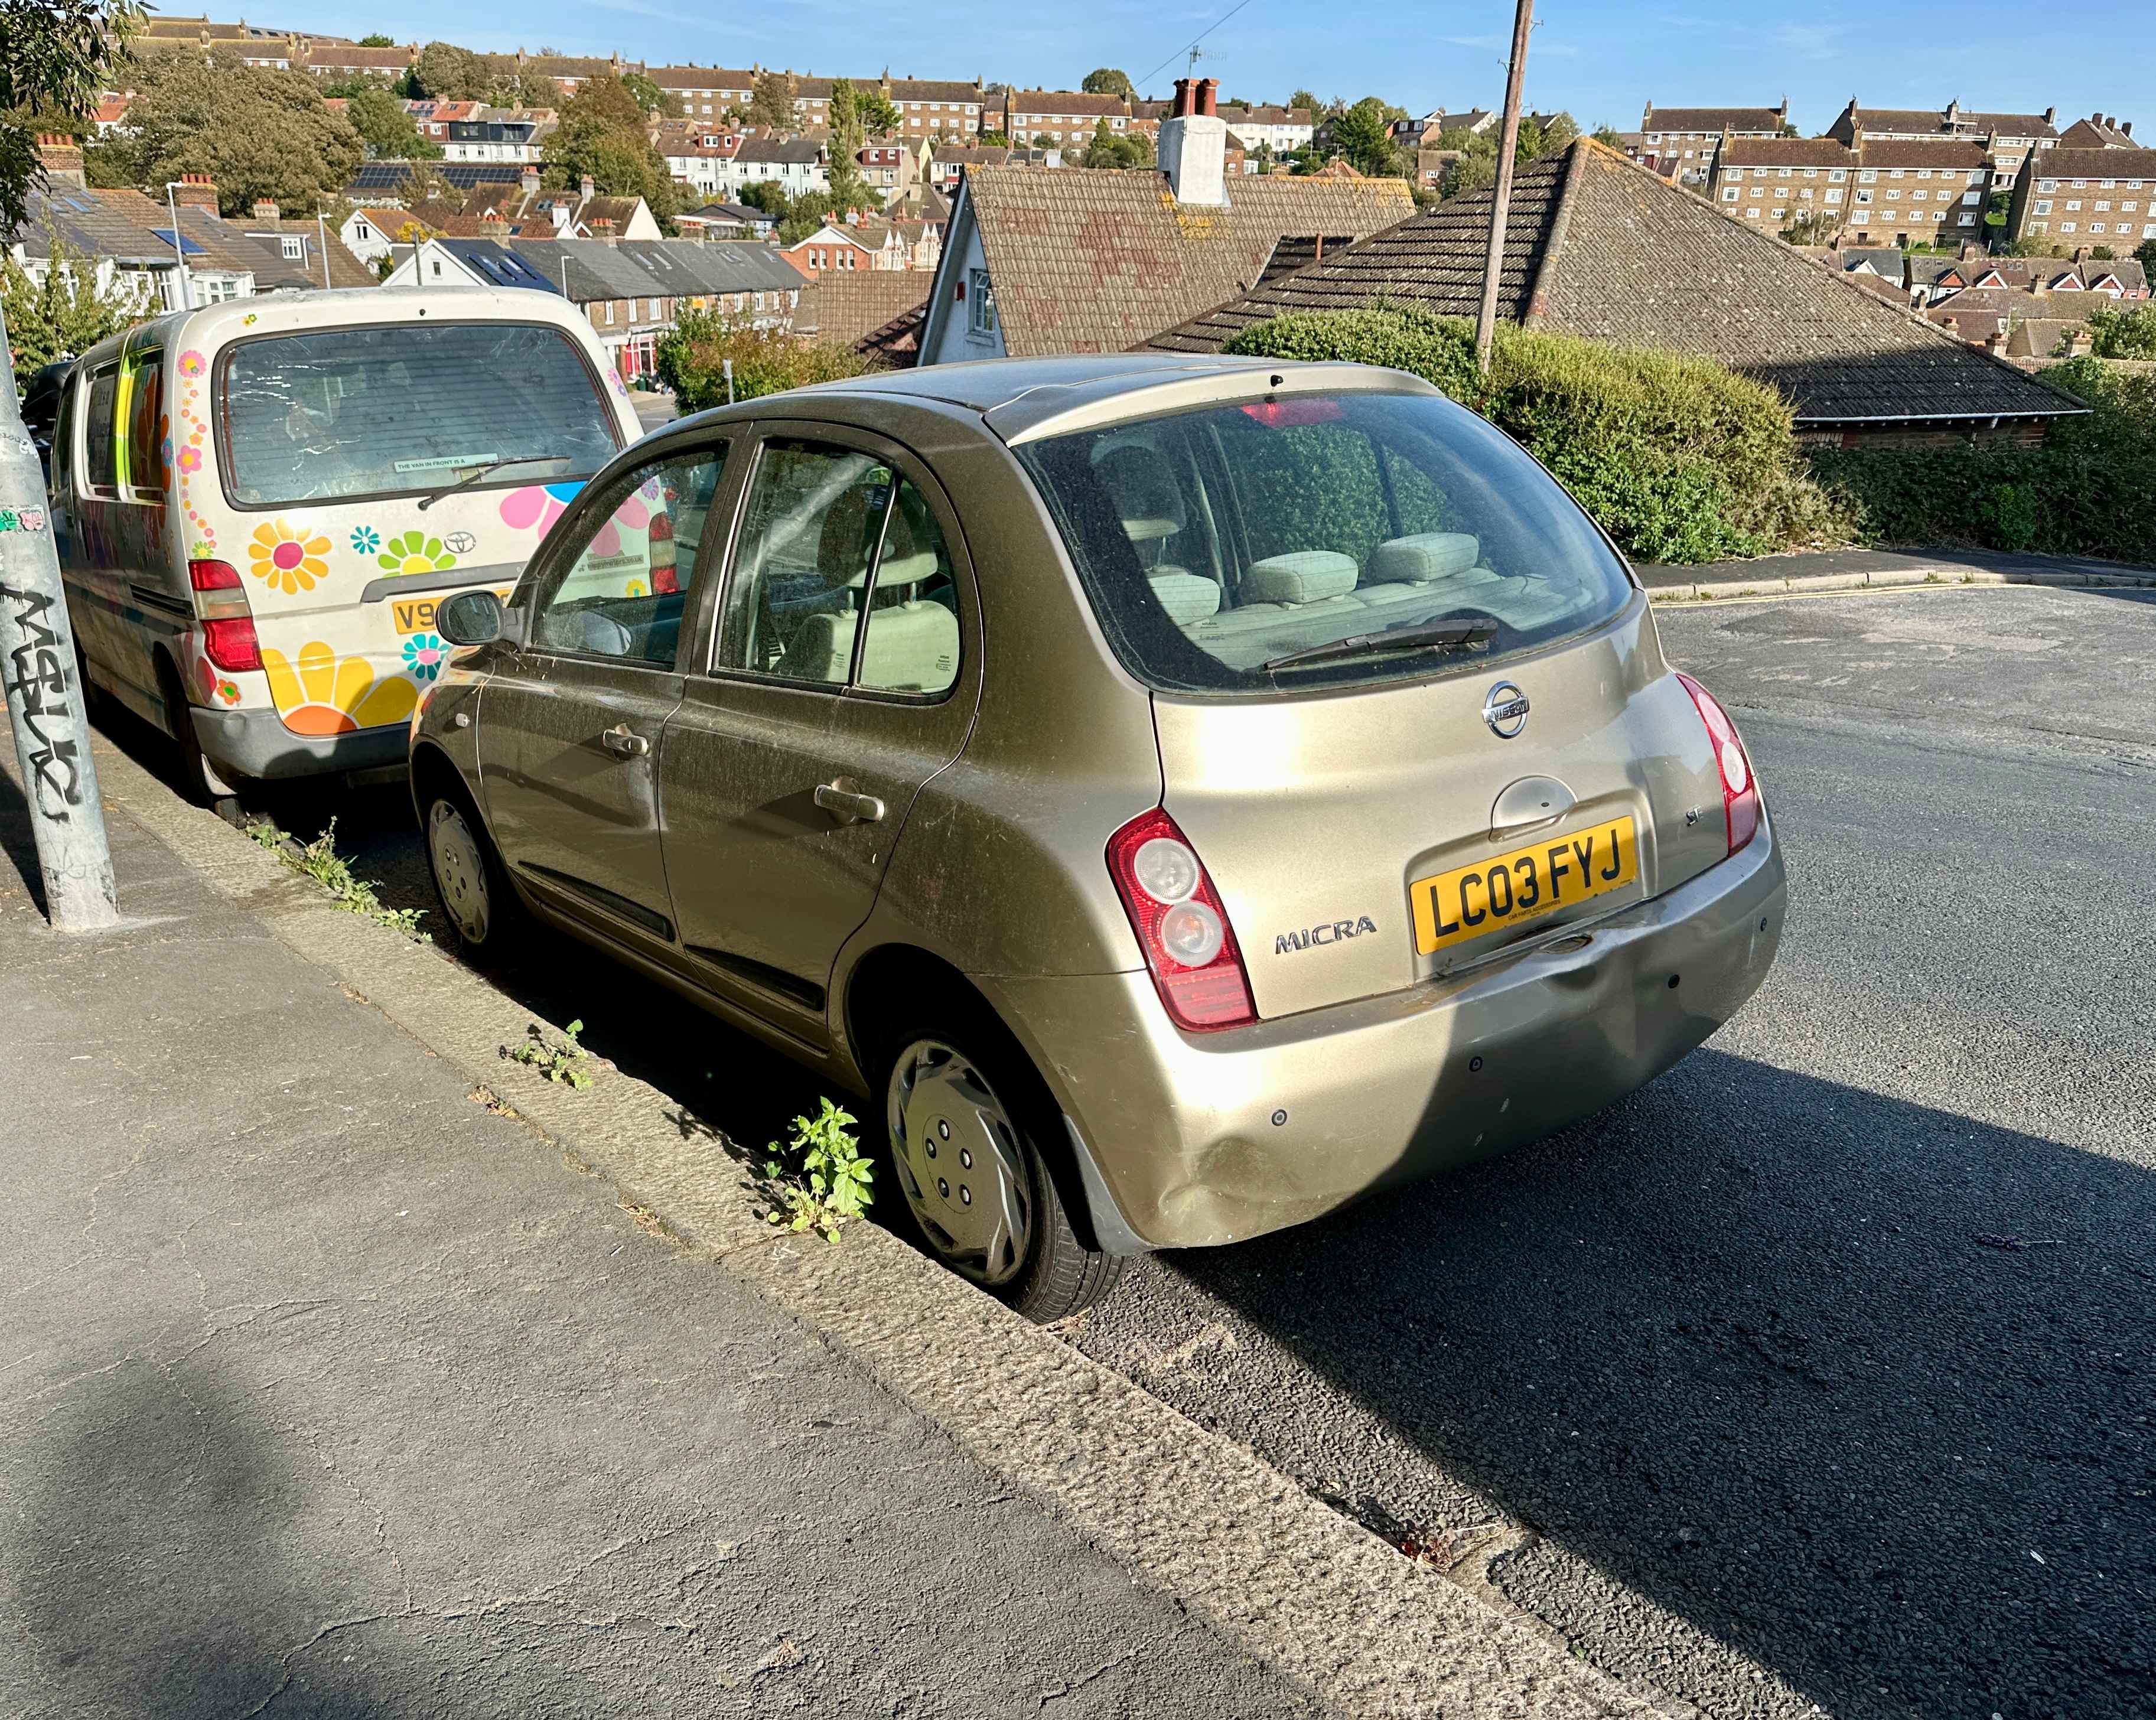 Photograph of LC03 FYJ - a Gold Nissan Micra parked in Hollingdean by a non-resident, and potentially abandoned. The fifth of seventeen photographs supplied by the residents of Hollingdean.